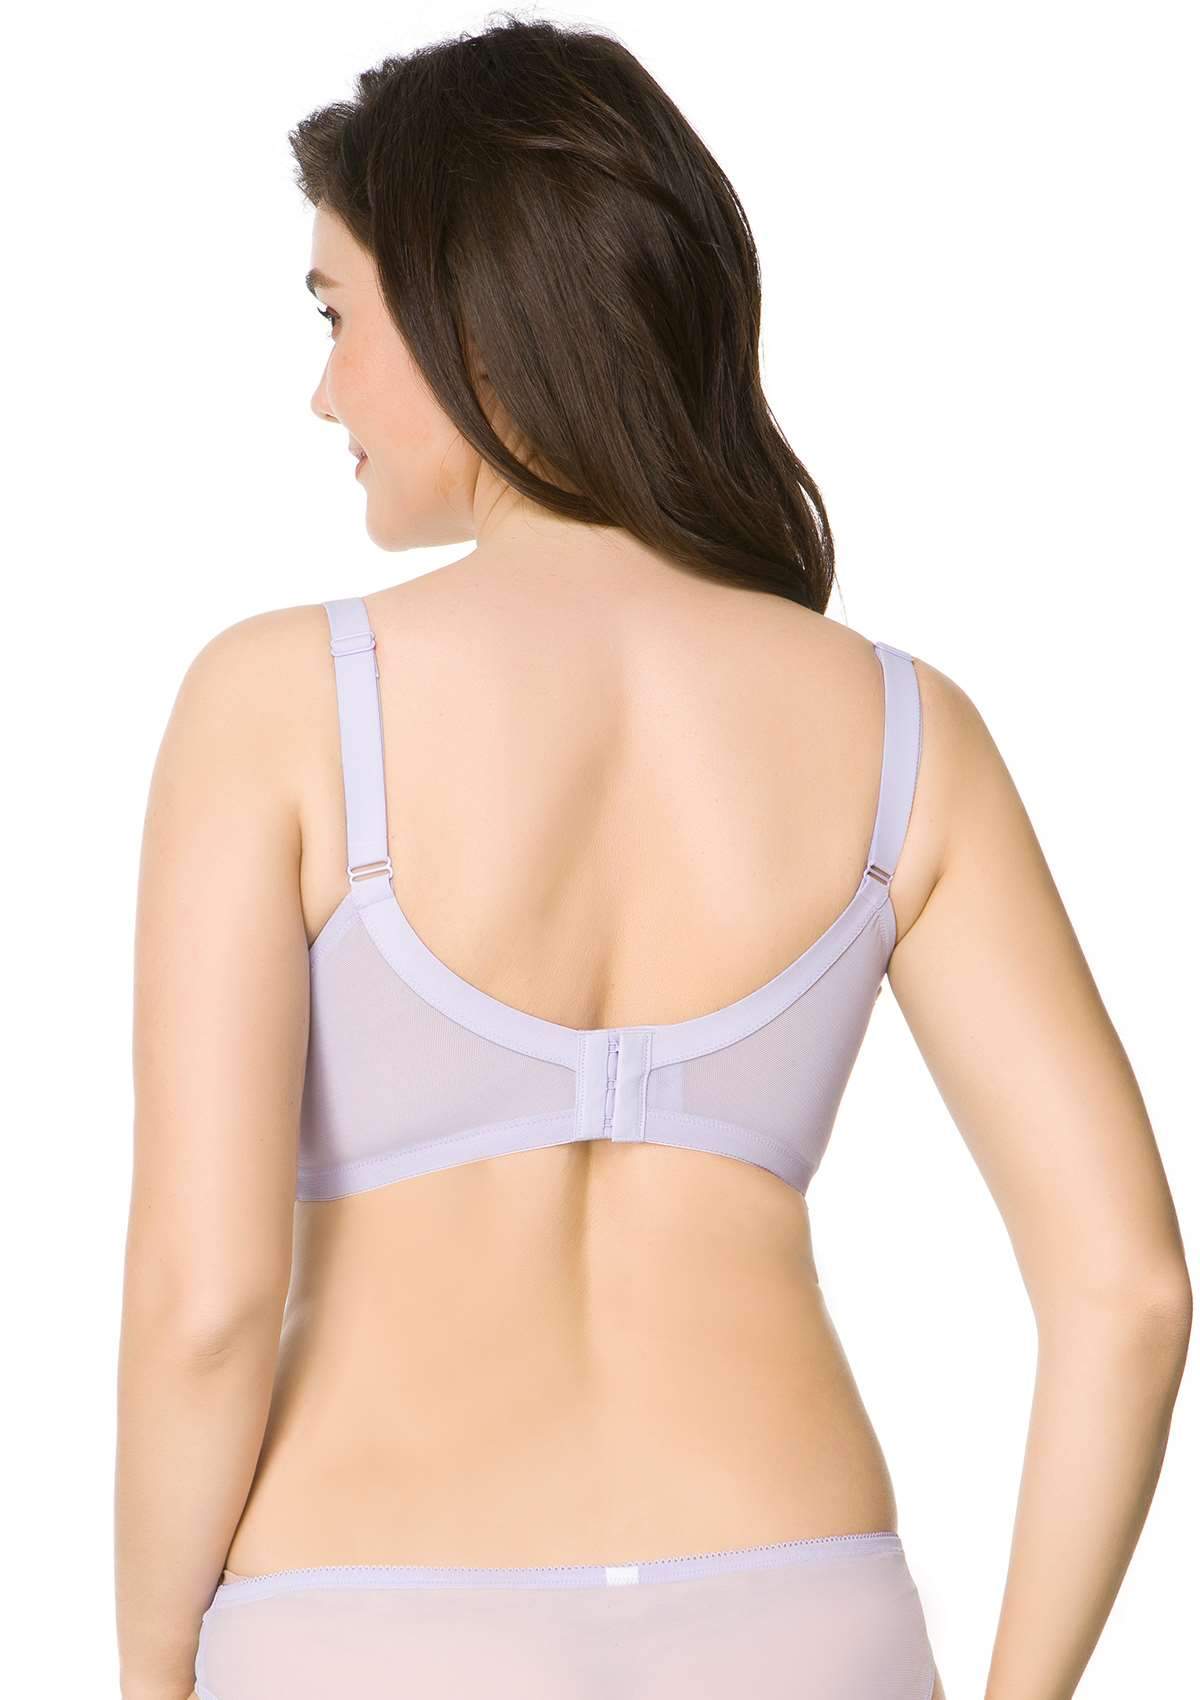 HSIA Wisteria Bra For Lift And Support - Full Coverage Minimizer Bra - Light Pink / 34 / C